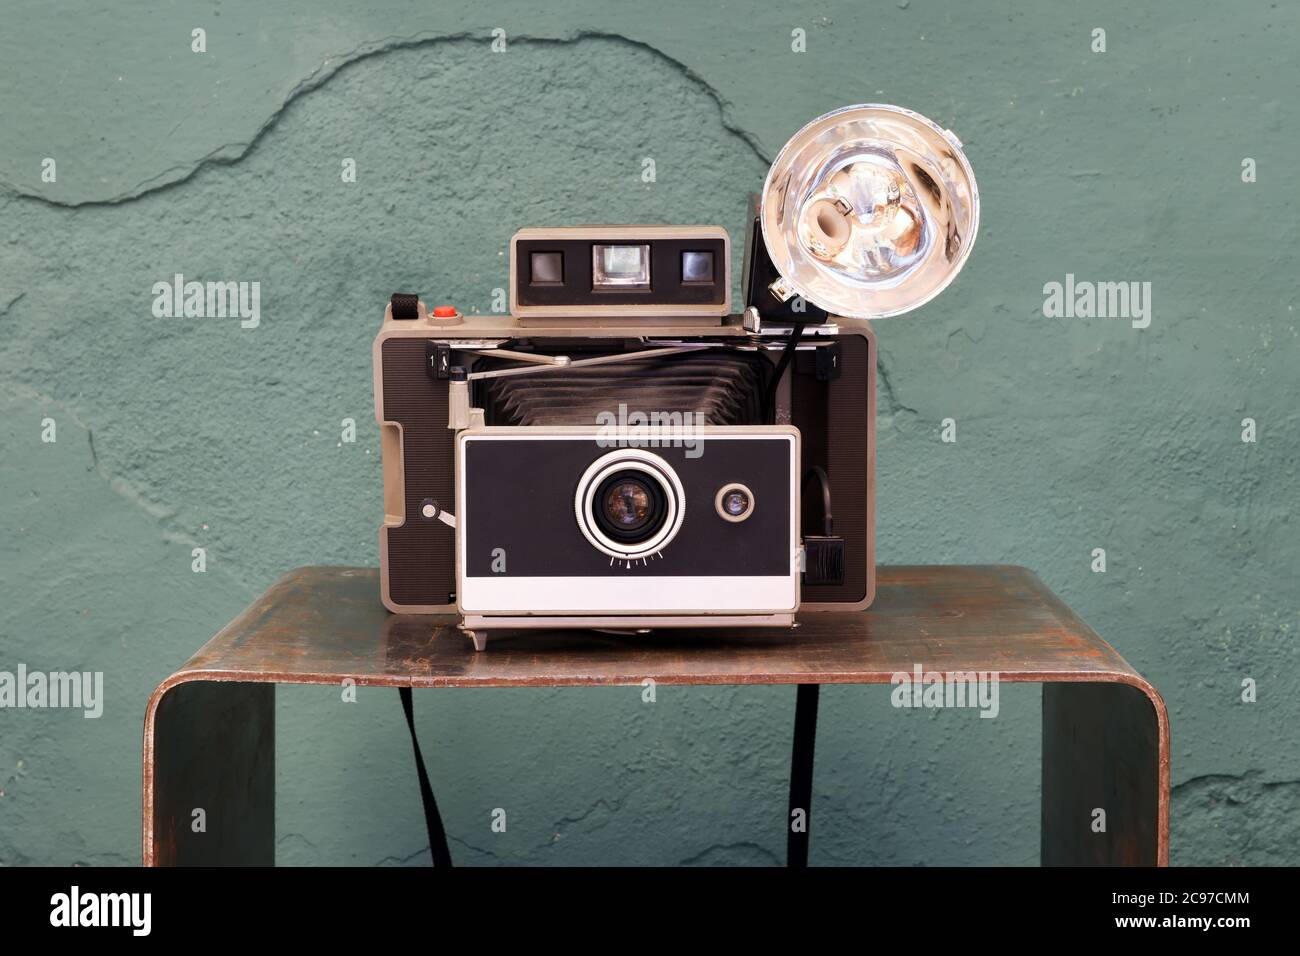 Old vintage instant camera with bellows and lamp on a small shelf in front of a damaged green textured wall in a photographic concept Stock Photo